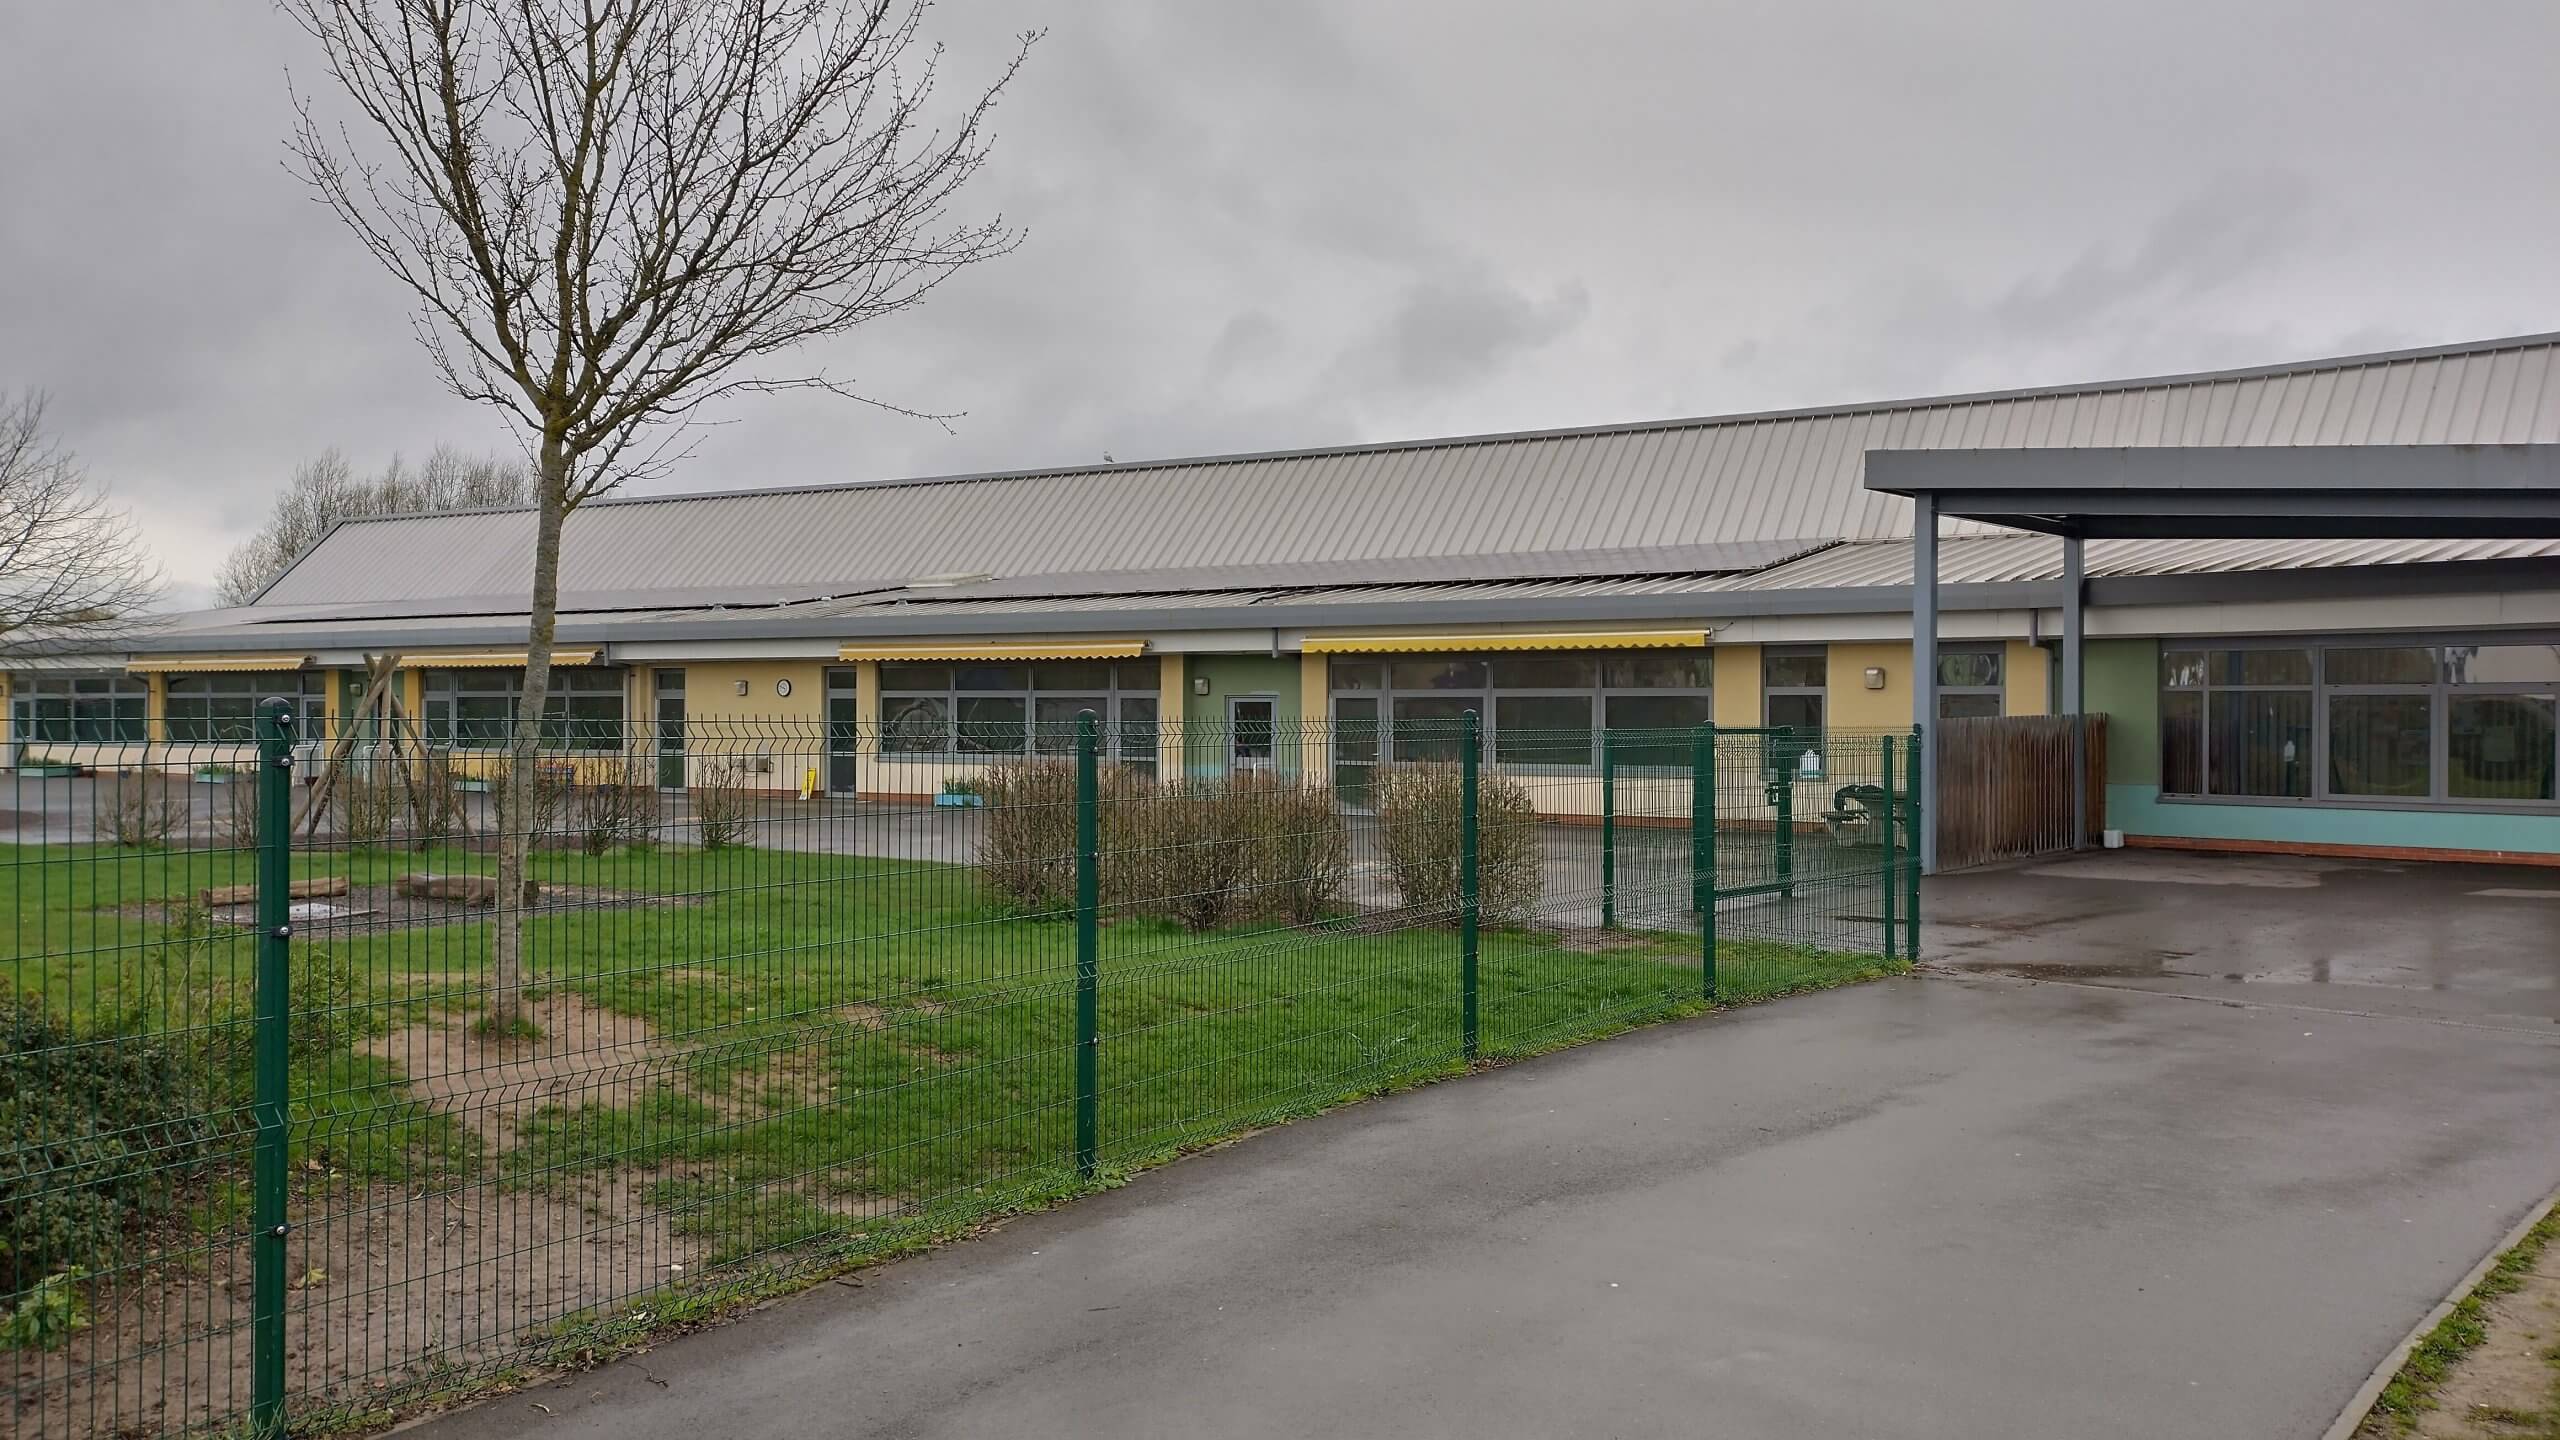 A school in Bridgwater, Somerset. External Grey 20 solar window film applied by Tinting Express, to help control heat and glare in the classrooms along with tidying up the overall look of the building from the playground.